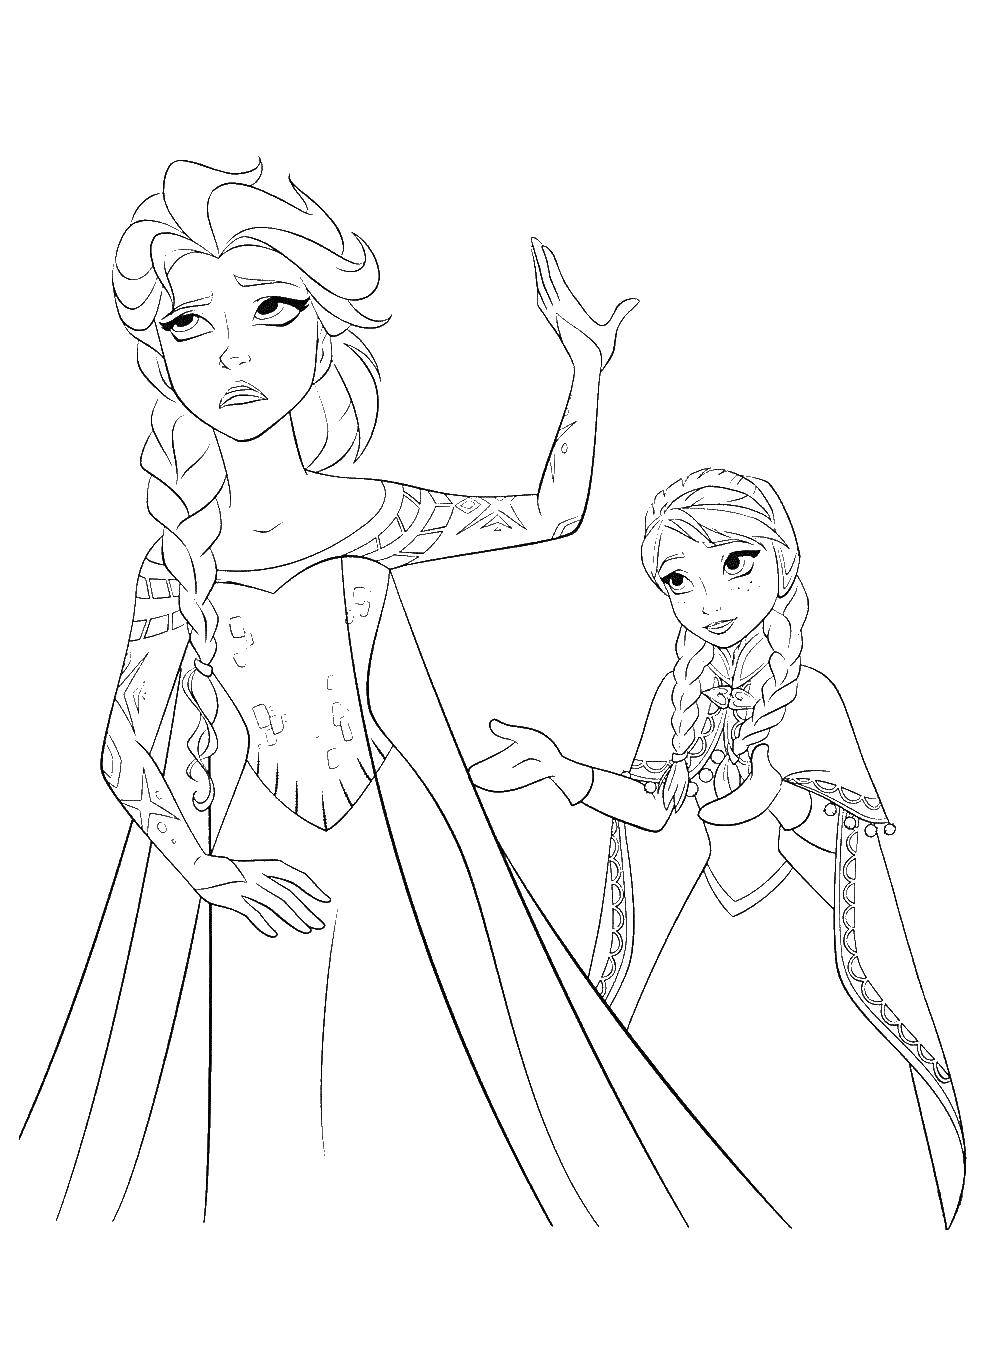 Coloring The Queen with Princess. Category The Queen. Tags:  Queen, Princess, family.